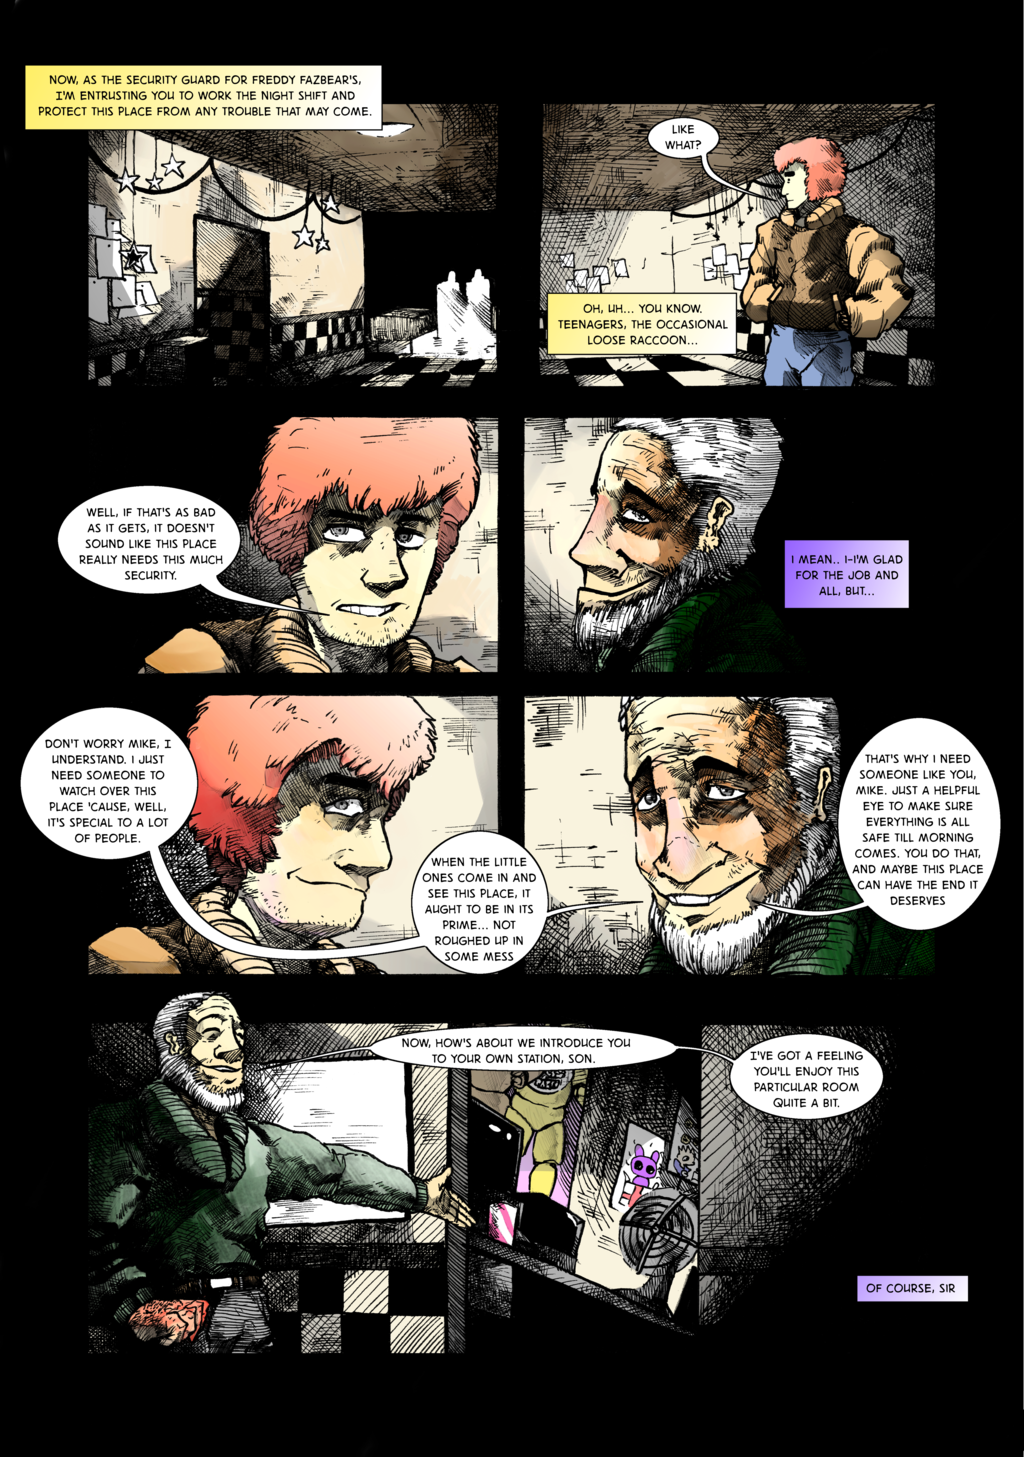 You Should Read This Fan-Made Five Nights At Freddy’s Comic